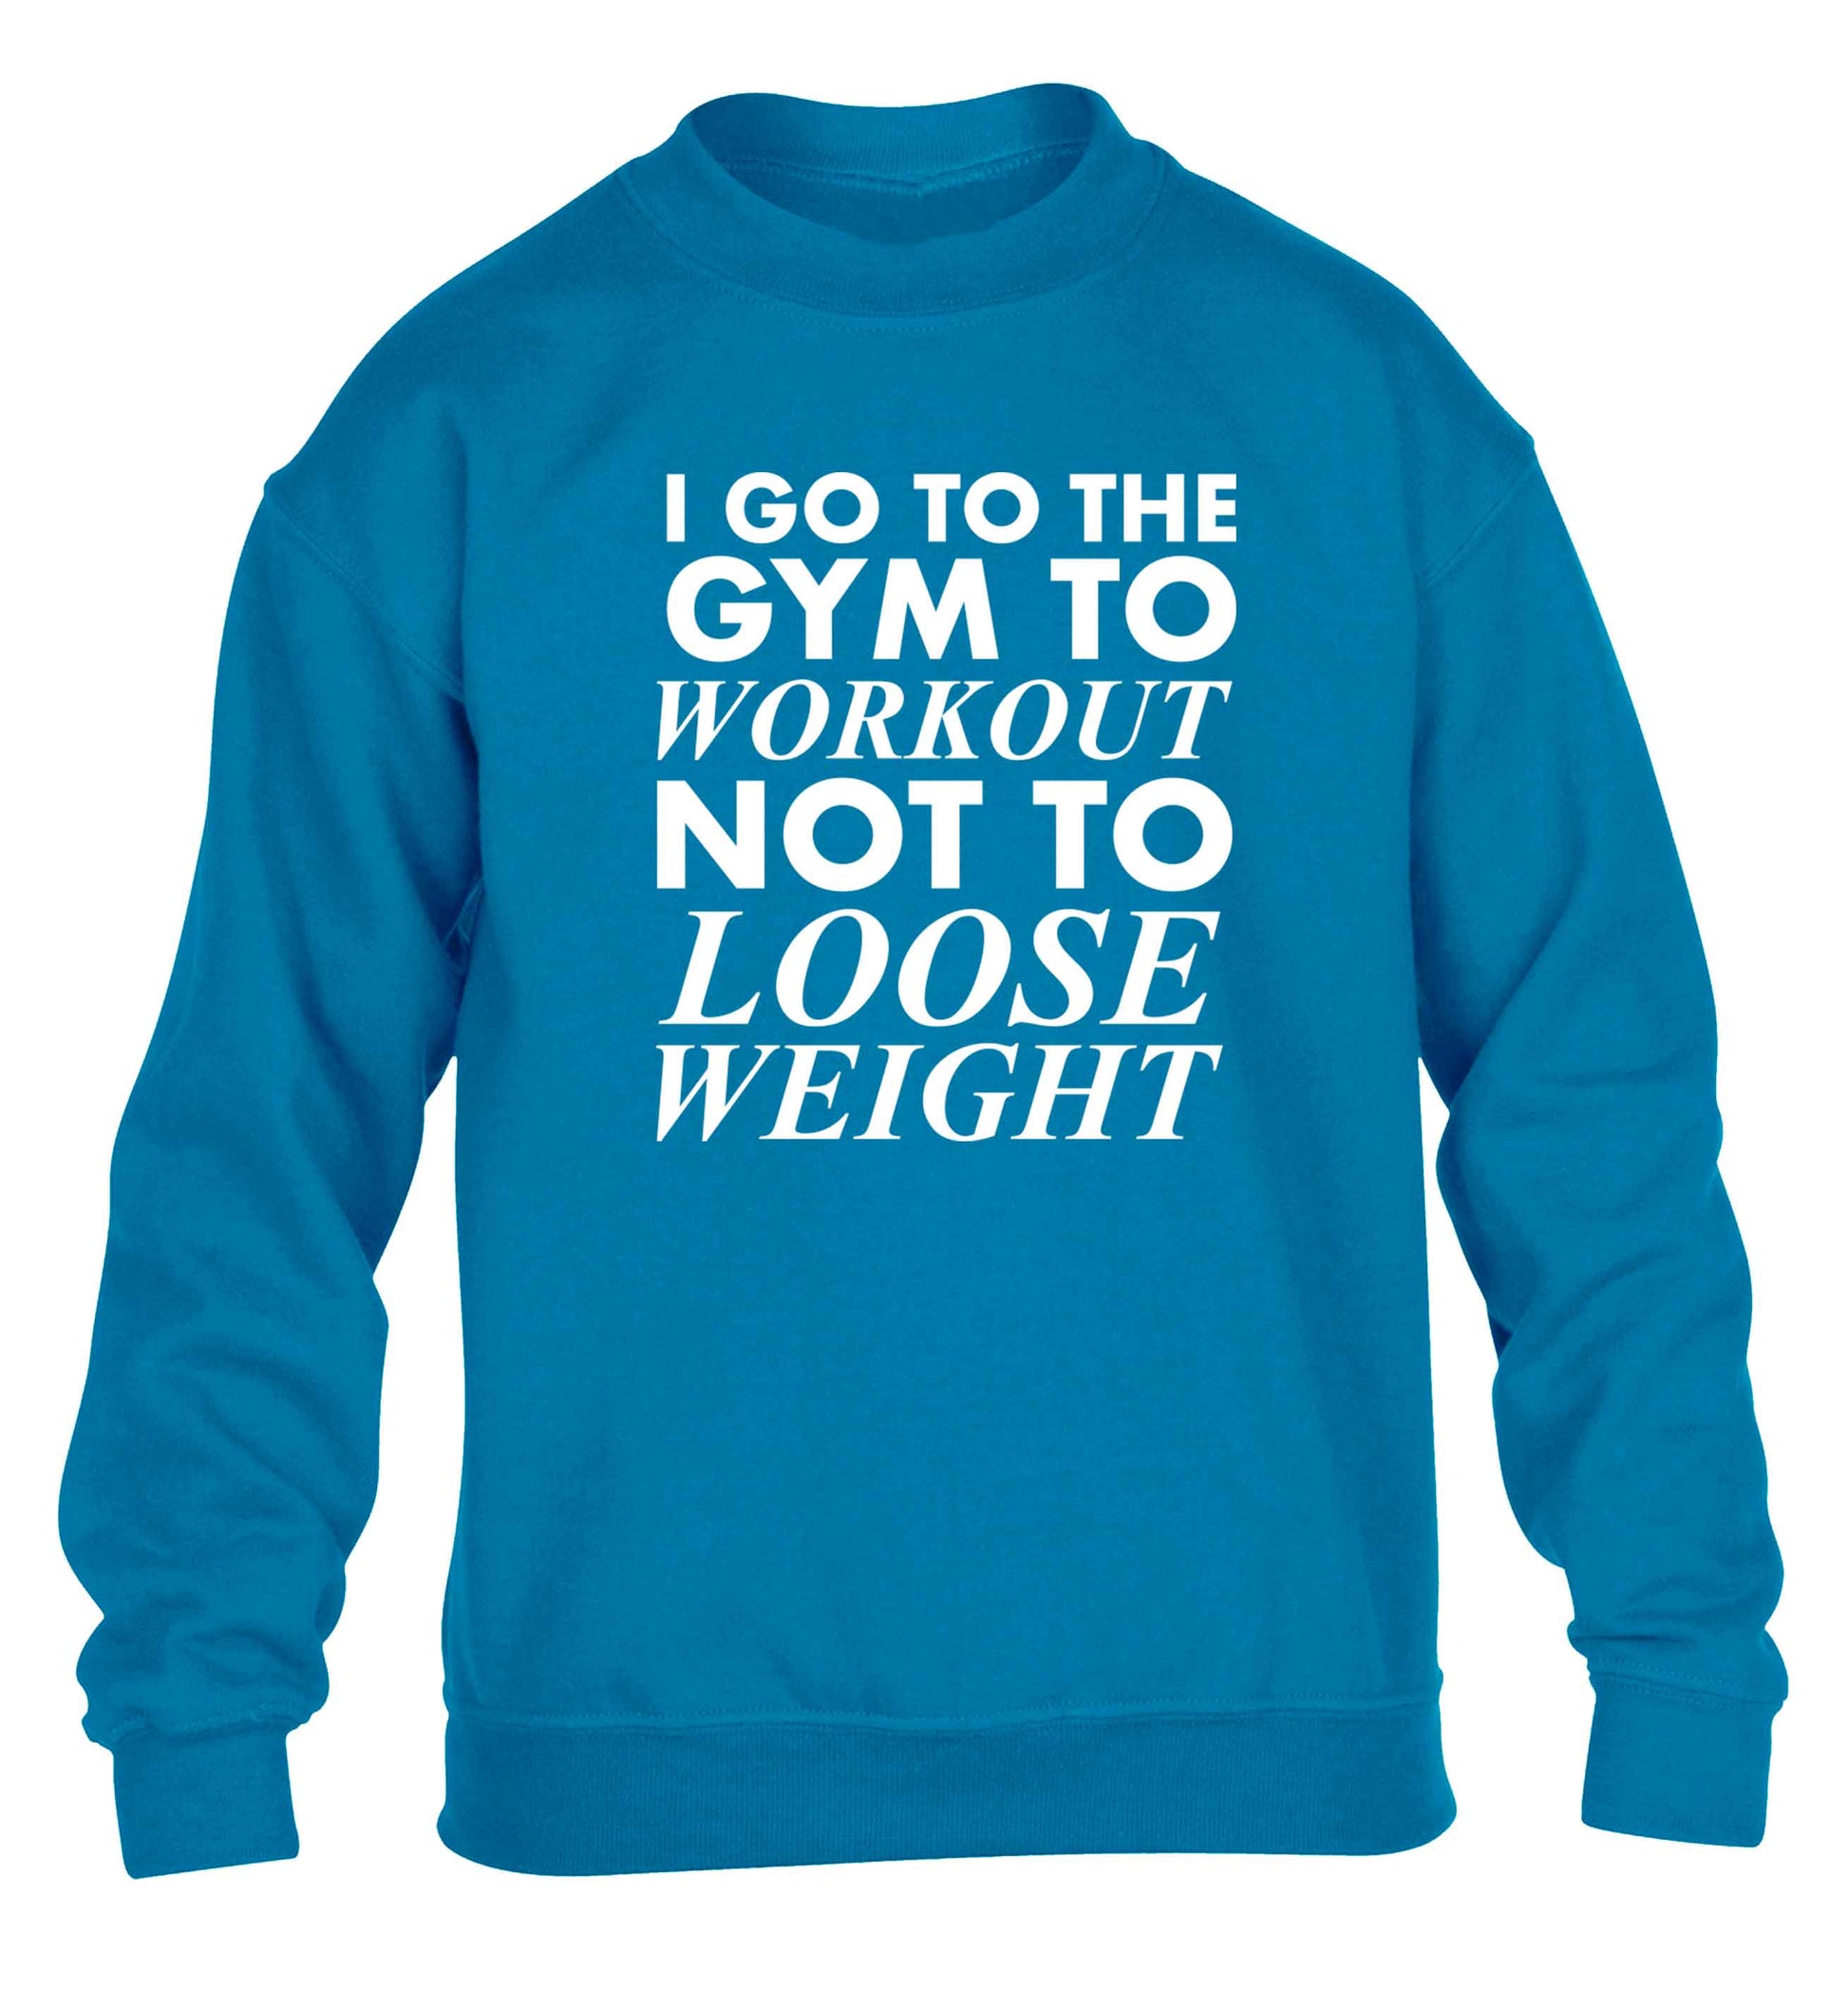 I go to the gym to workout not to loose weight children's blue sweater 12-13 Years